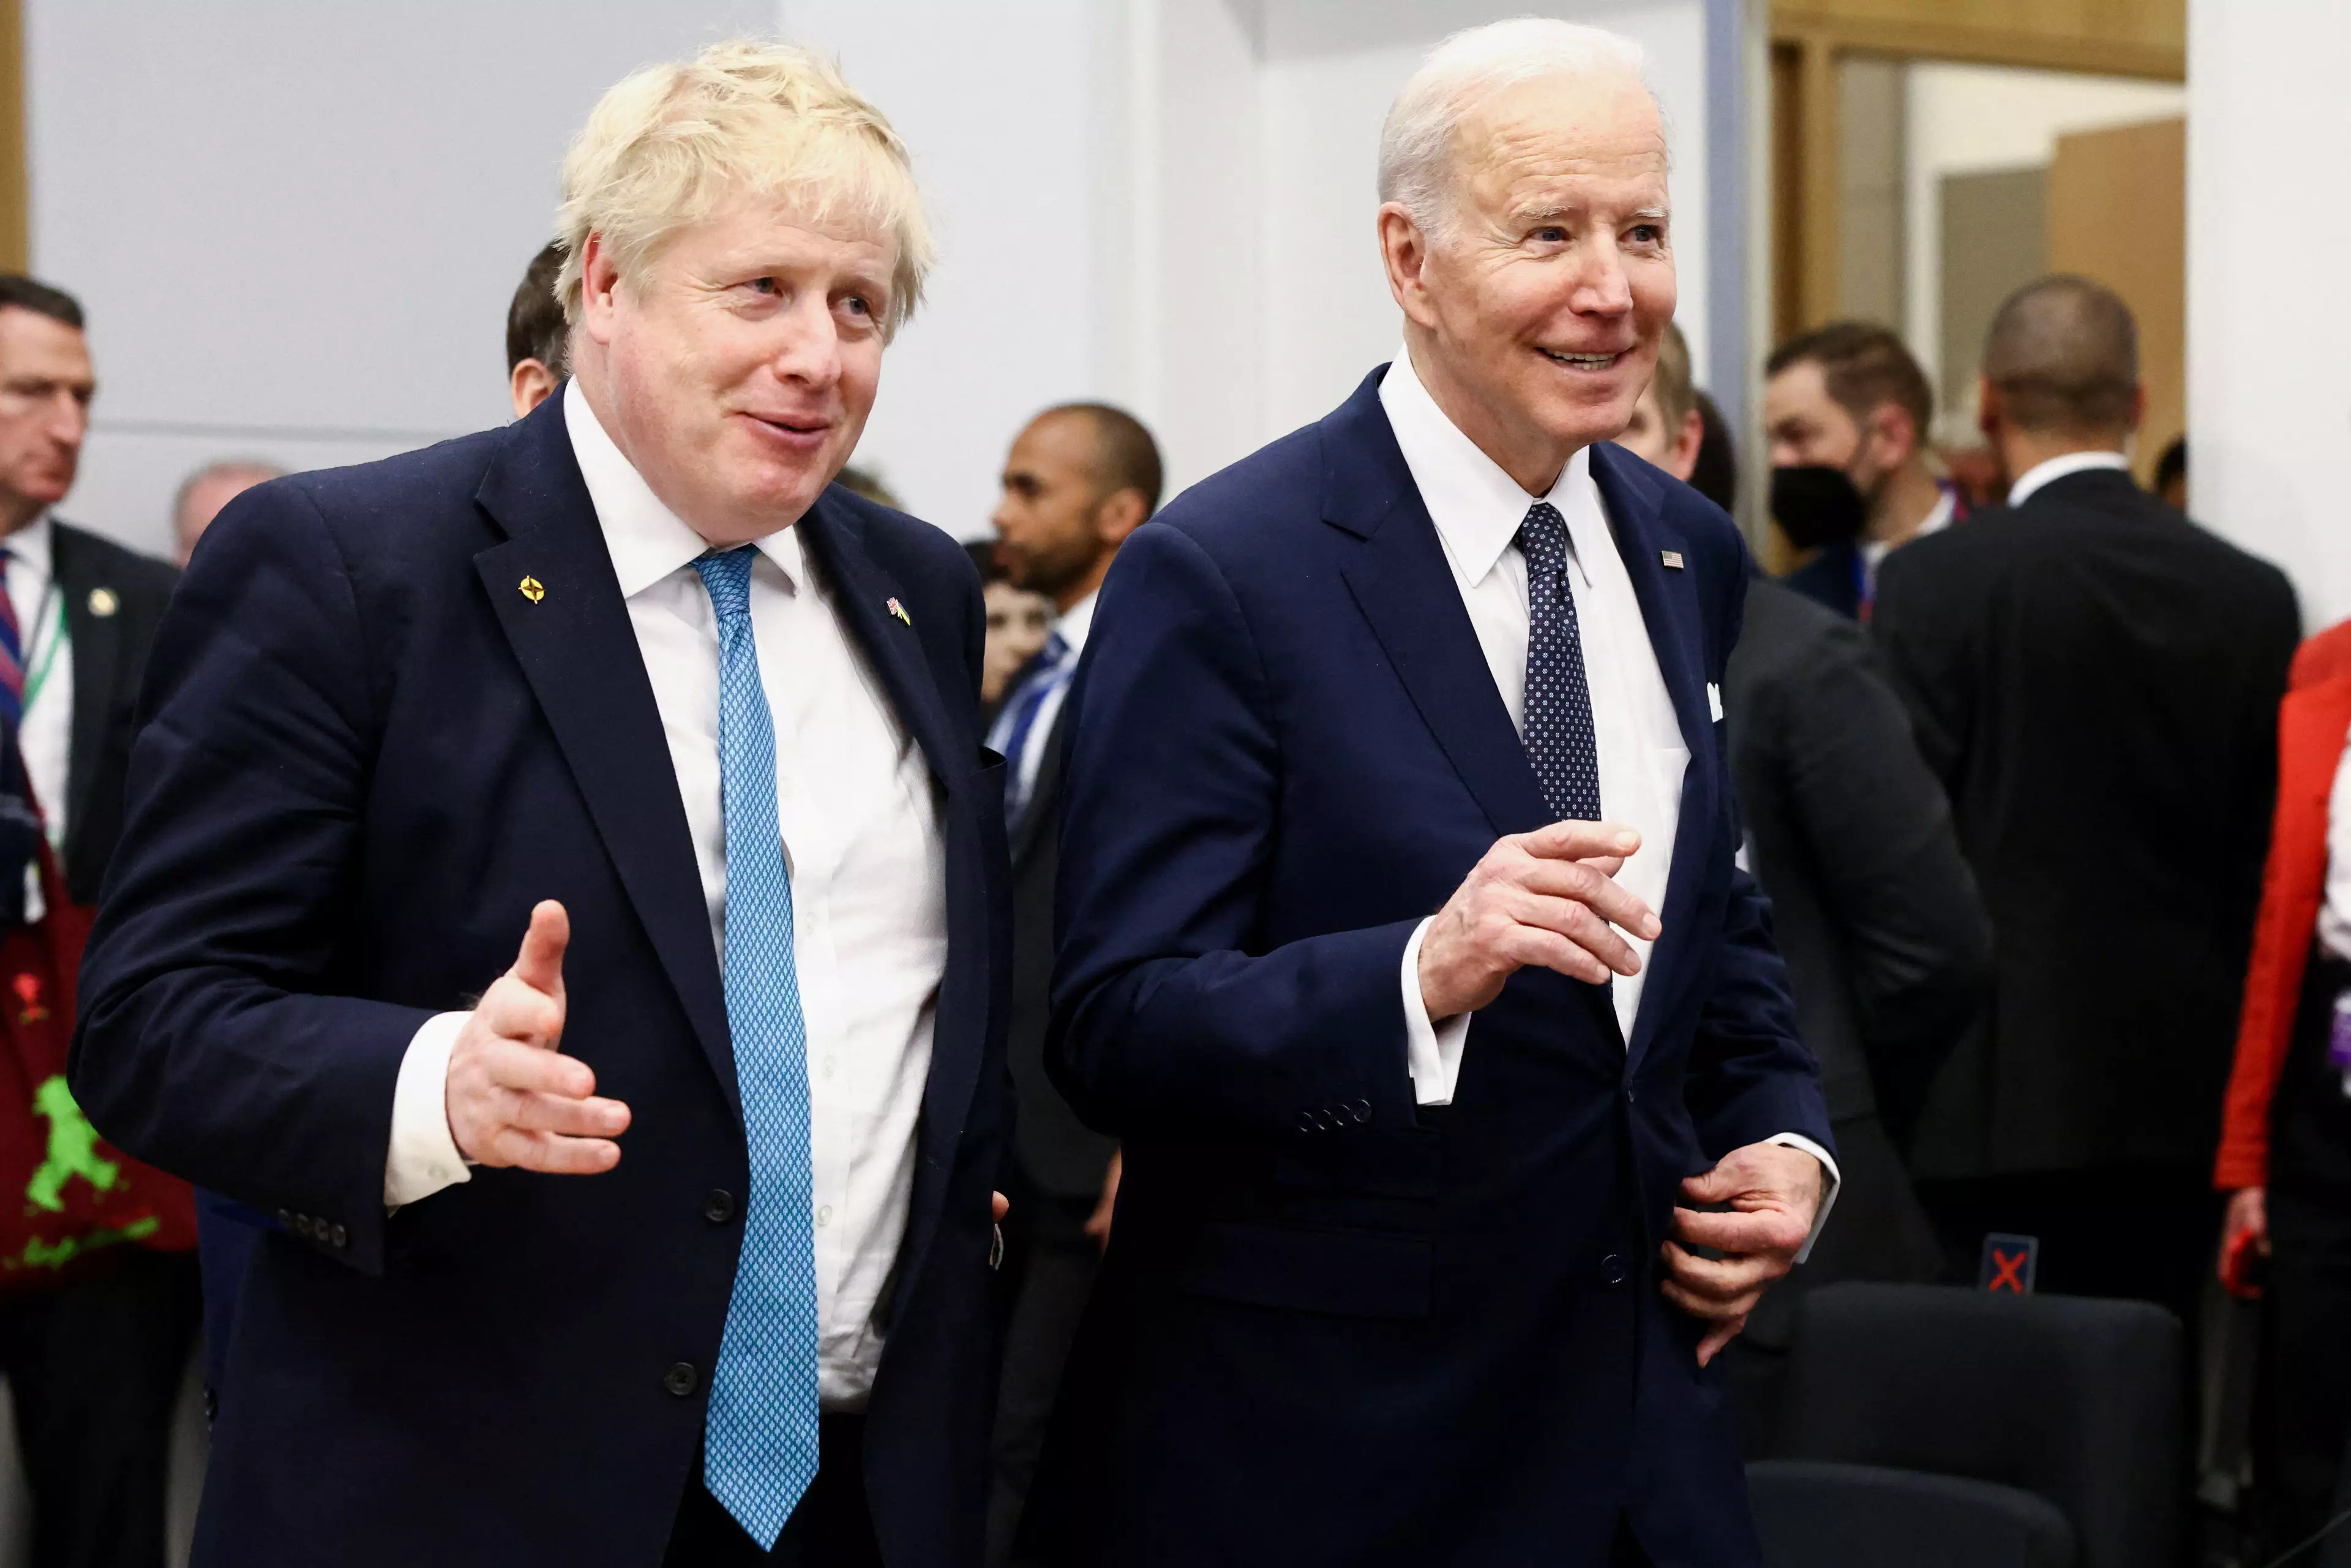 Johnson with President Biden ahead of the summit. Image: PA Images